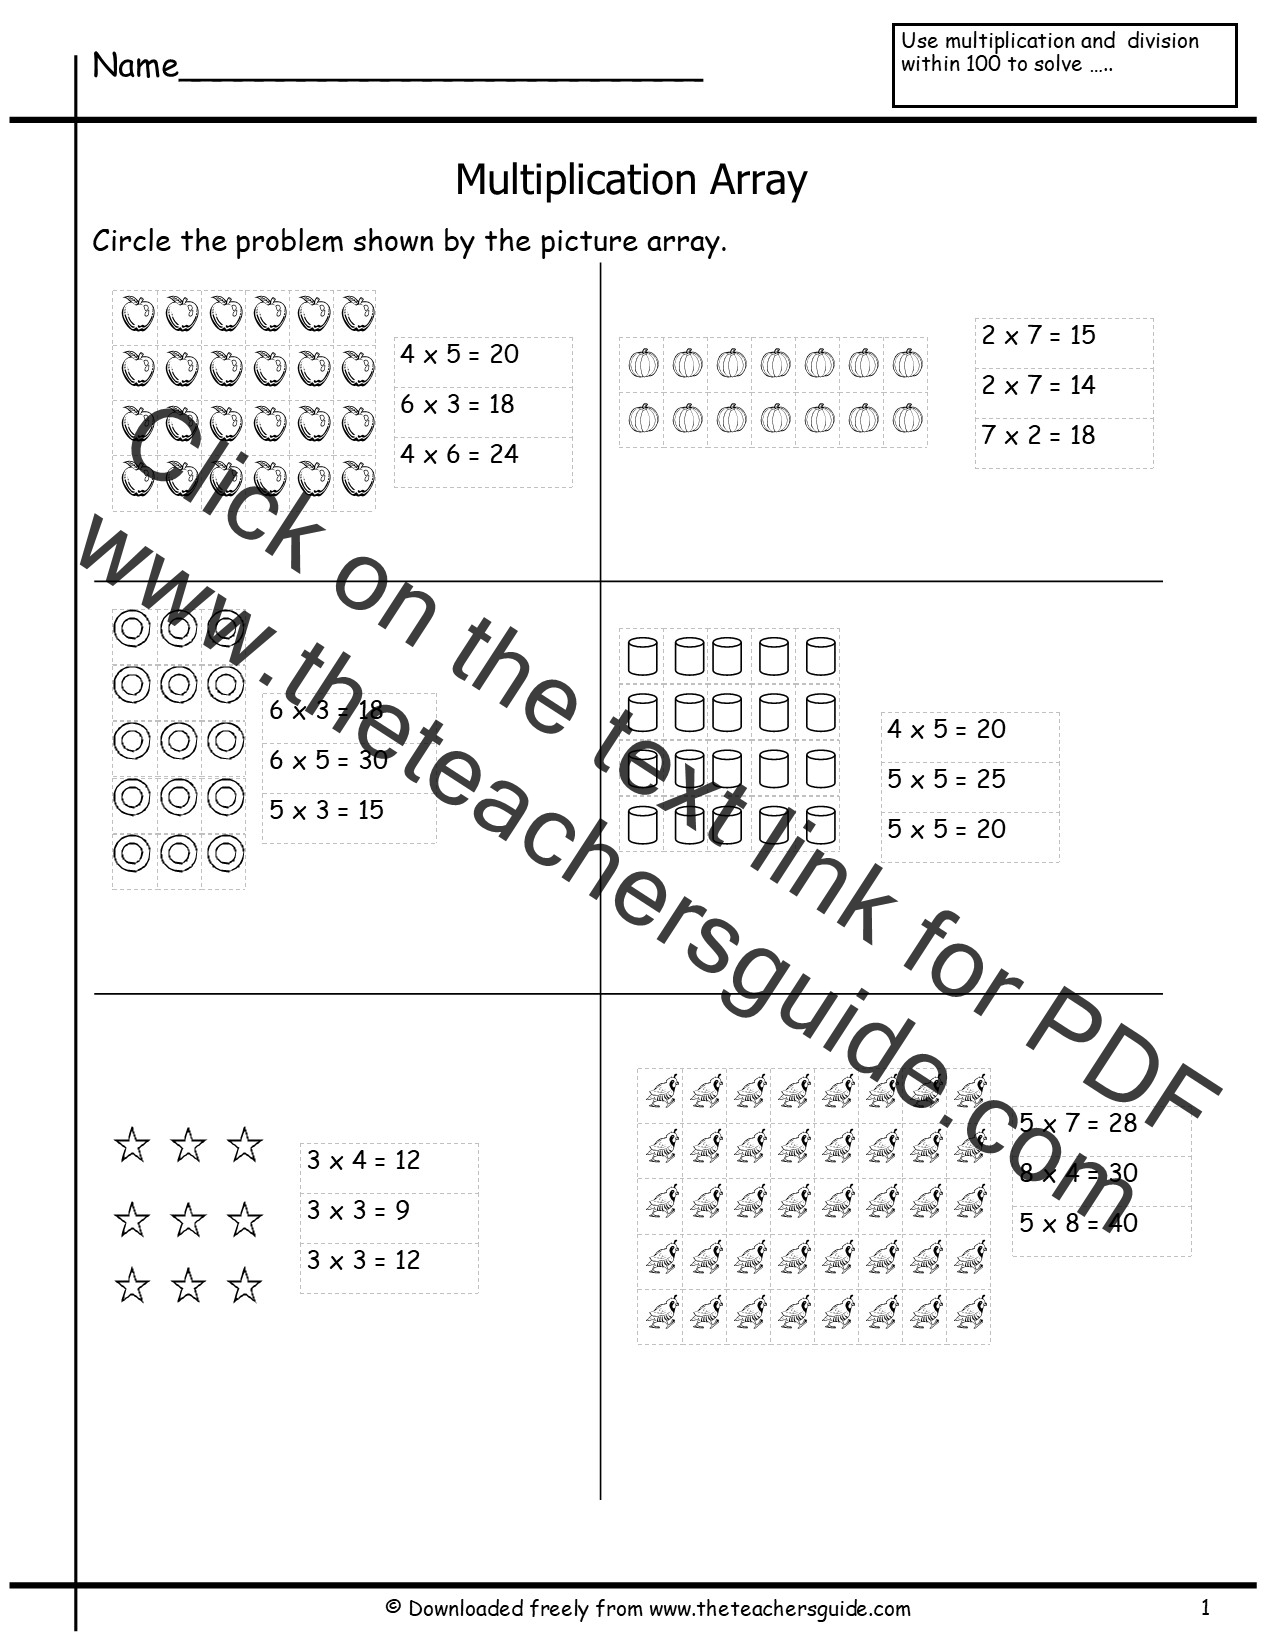  Multiplication Array Worksheets From The Teacher s Guide